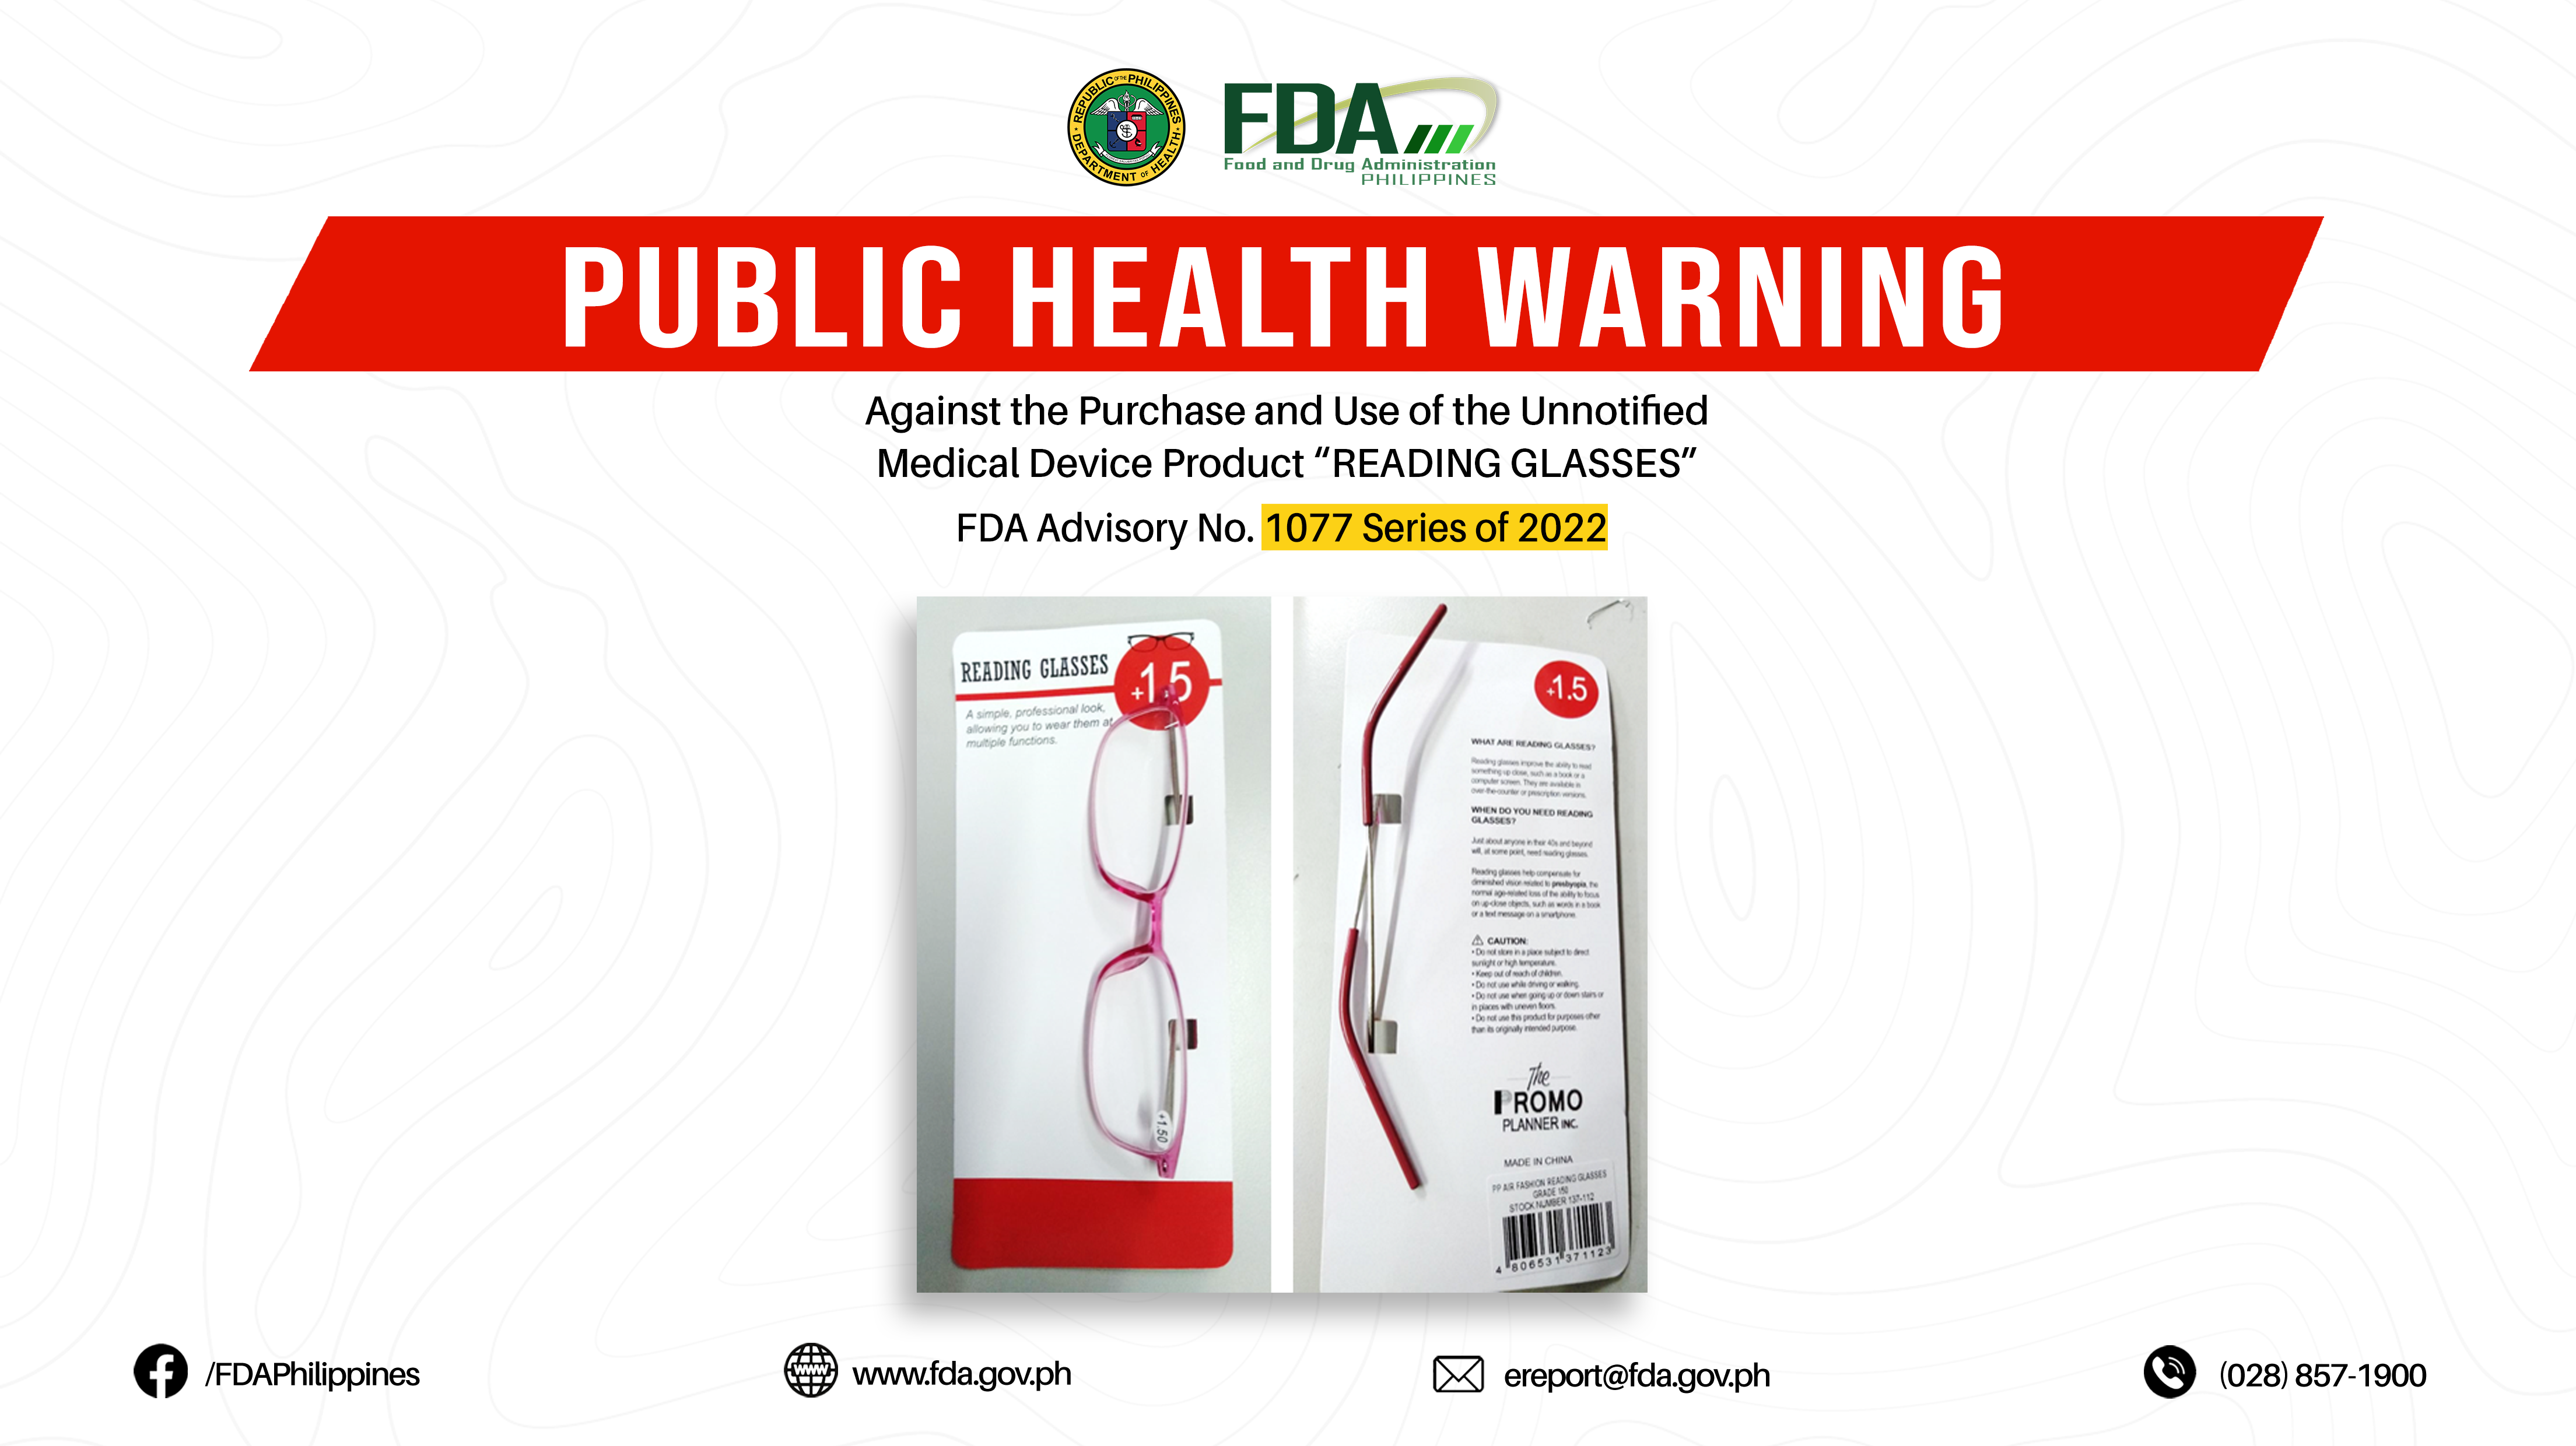 FDA Advisory No.2022-1077 || Public Health Warning Against the Purchase and Use of the Unnotified Medical Device Product “READING GLASSES”